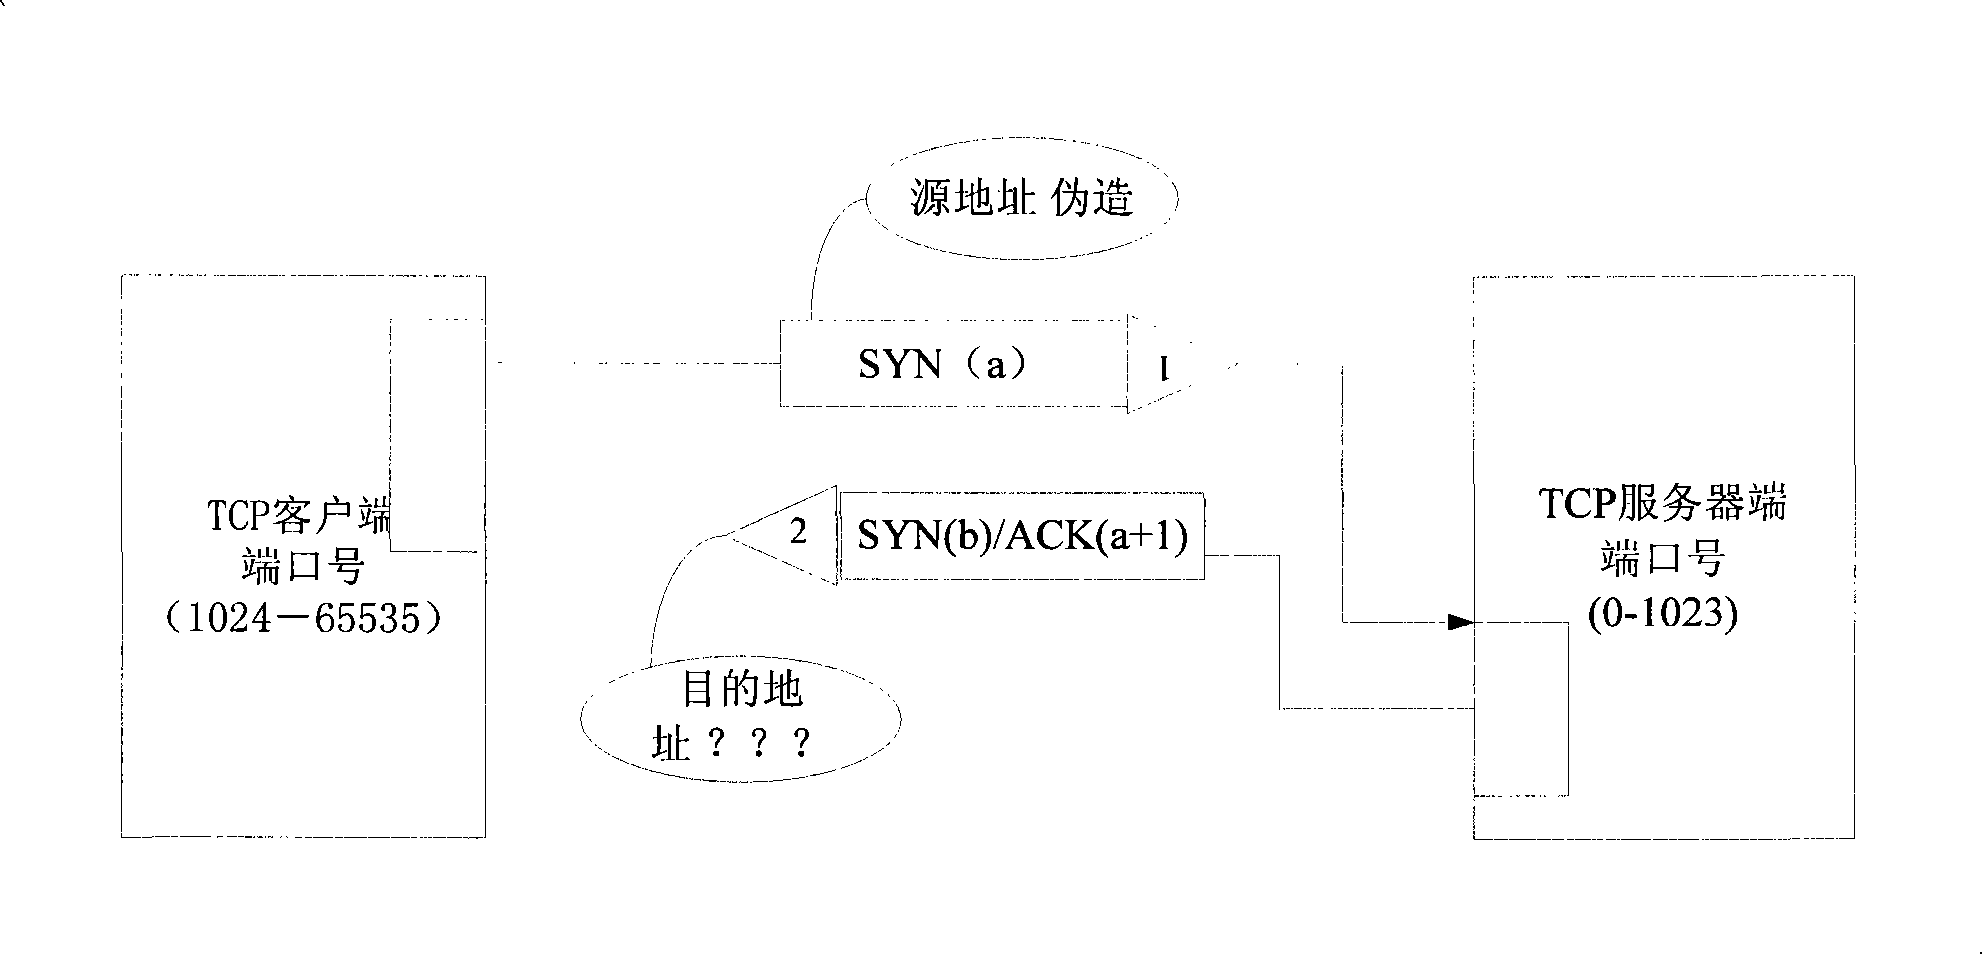 Method of preventing syn flood and router equipment